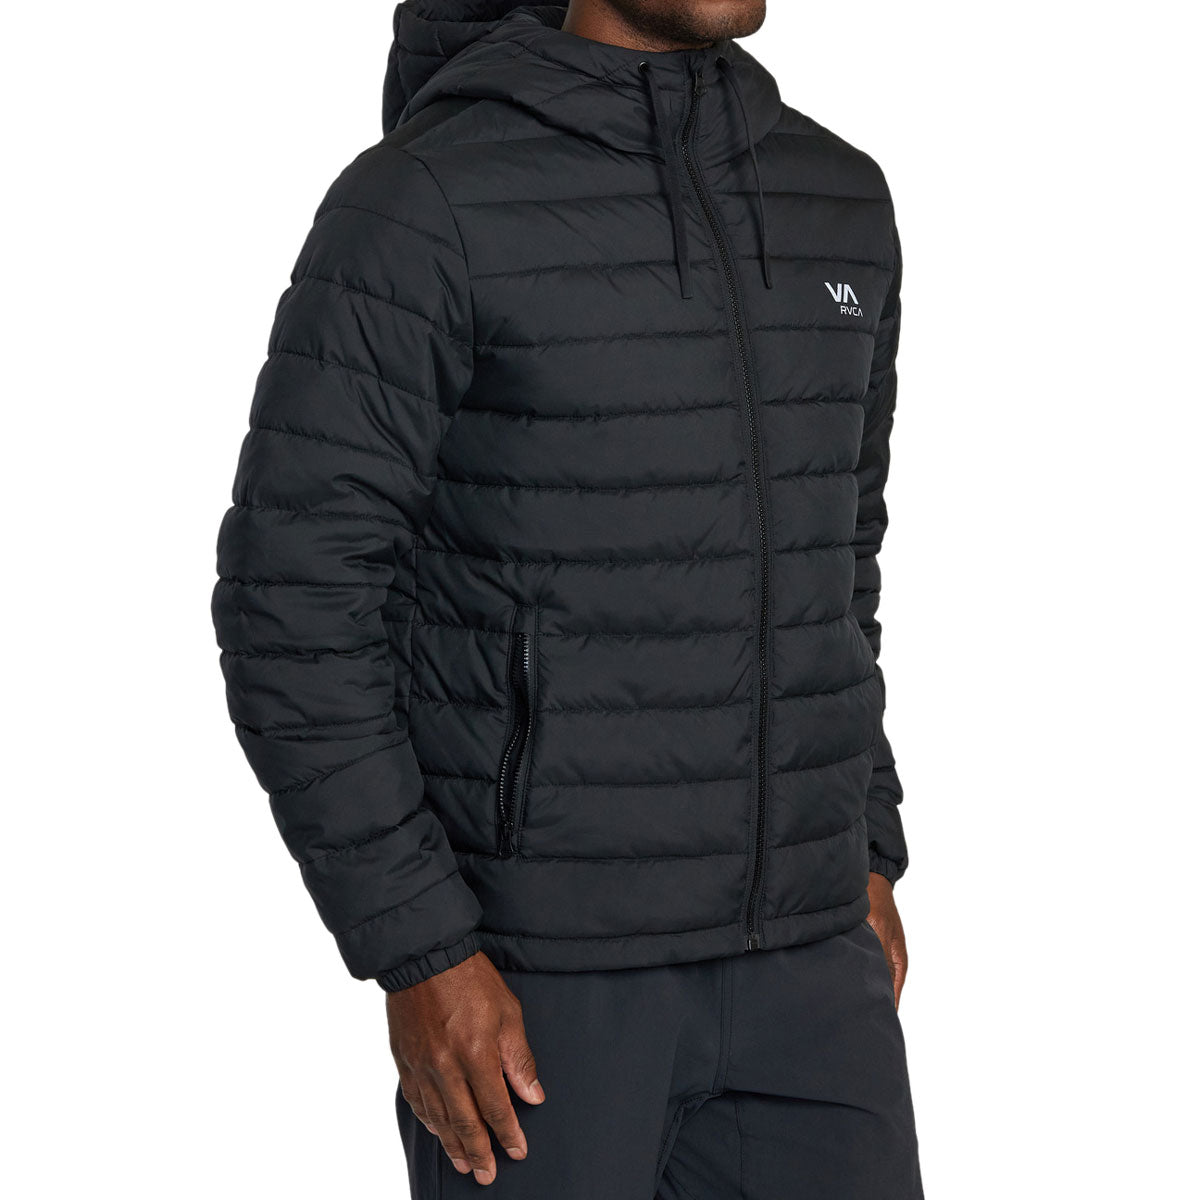 RVCA Packable Puffa Hooded Jacket - Black image 4